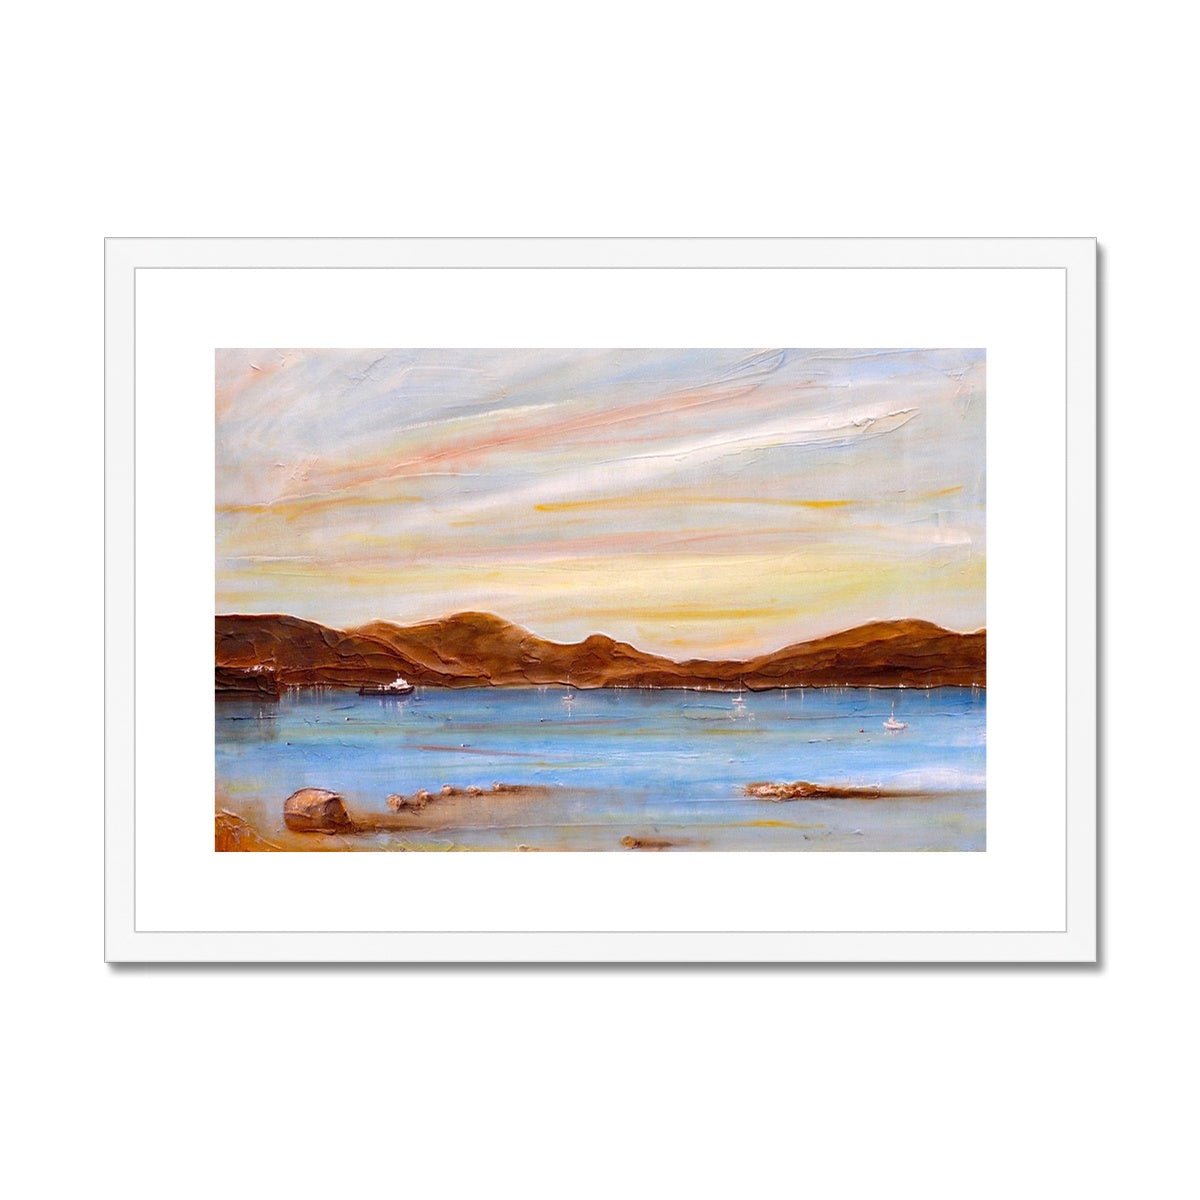 The Last Ferry To Dunoon Painting | Framed & Mounted Prints From Scotland-Framed & Mounted Prints-River Clyde Art Gallery-A2 Landscape-White Frame-Paintings, Prints, Homeware, Art Gifts From Scotland By Scottish Artist Kevin Hunter